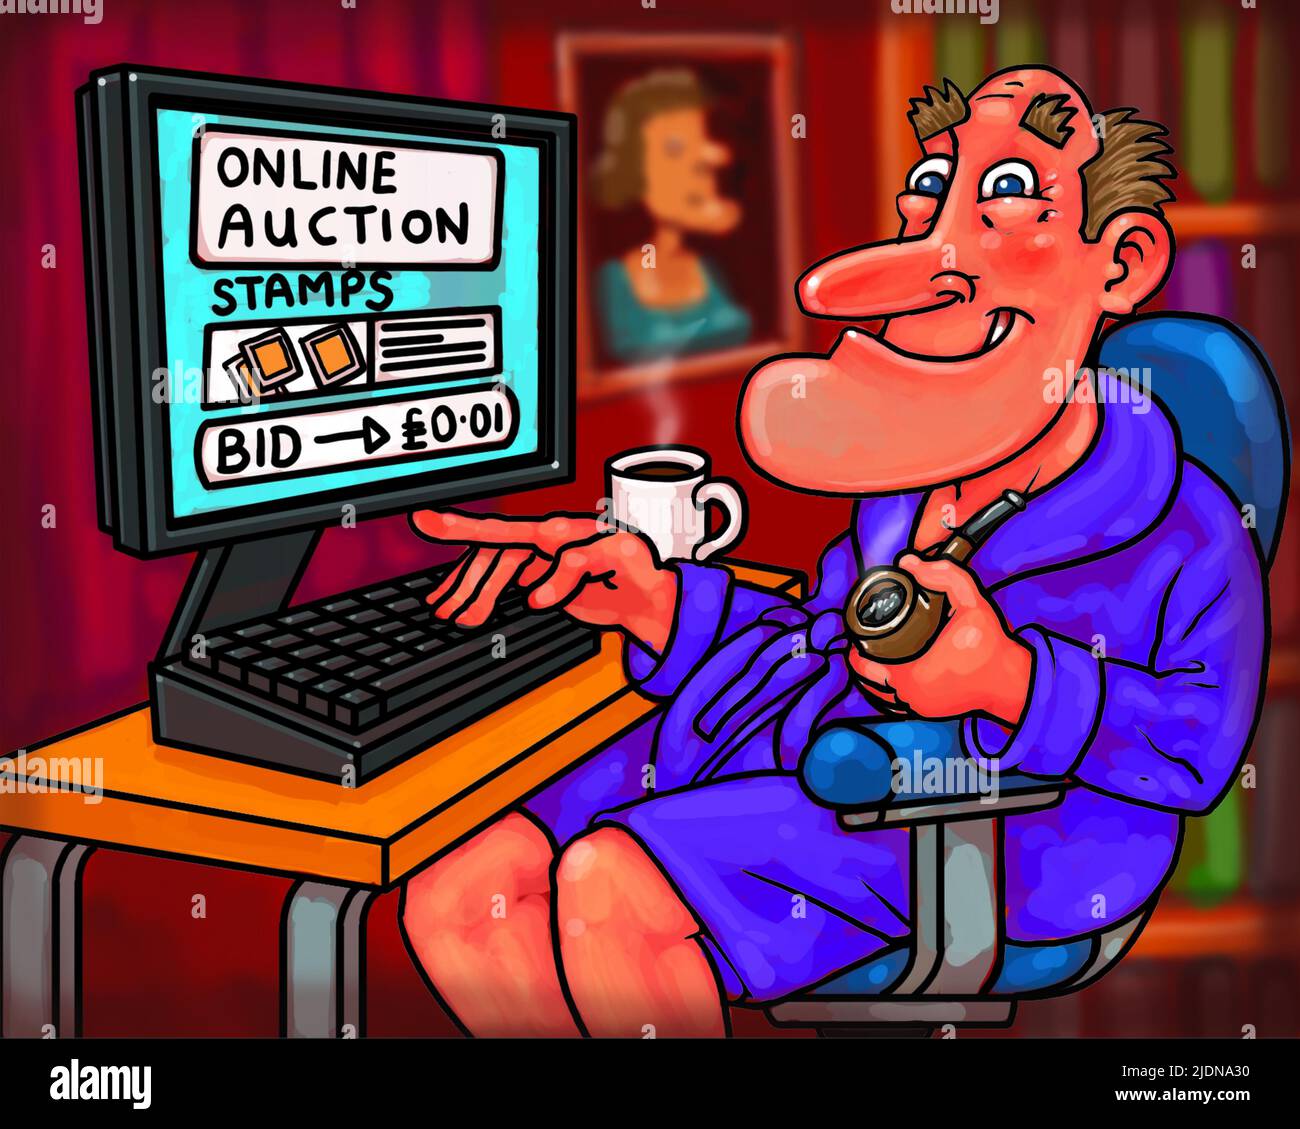 Art illustrating the convenience of online auctions, showing a man sitting in his dressing gown, bidding on a philately collection of postage stamps. Stock Photo